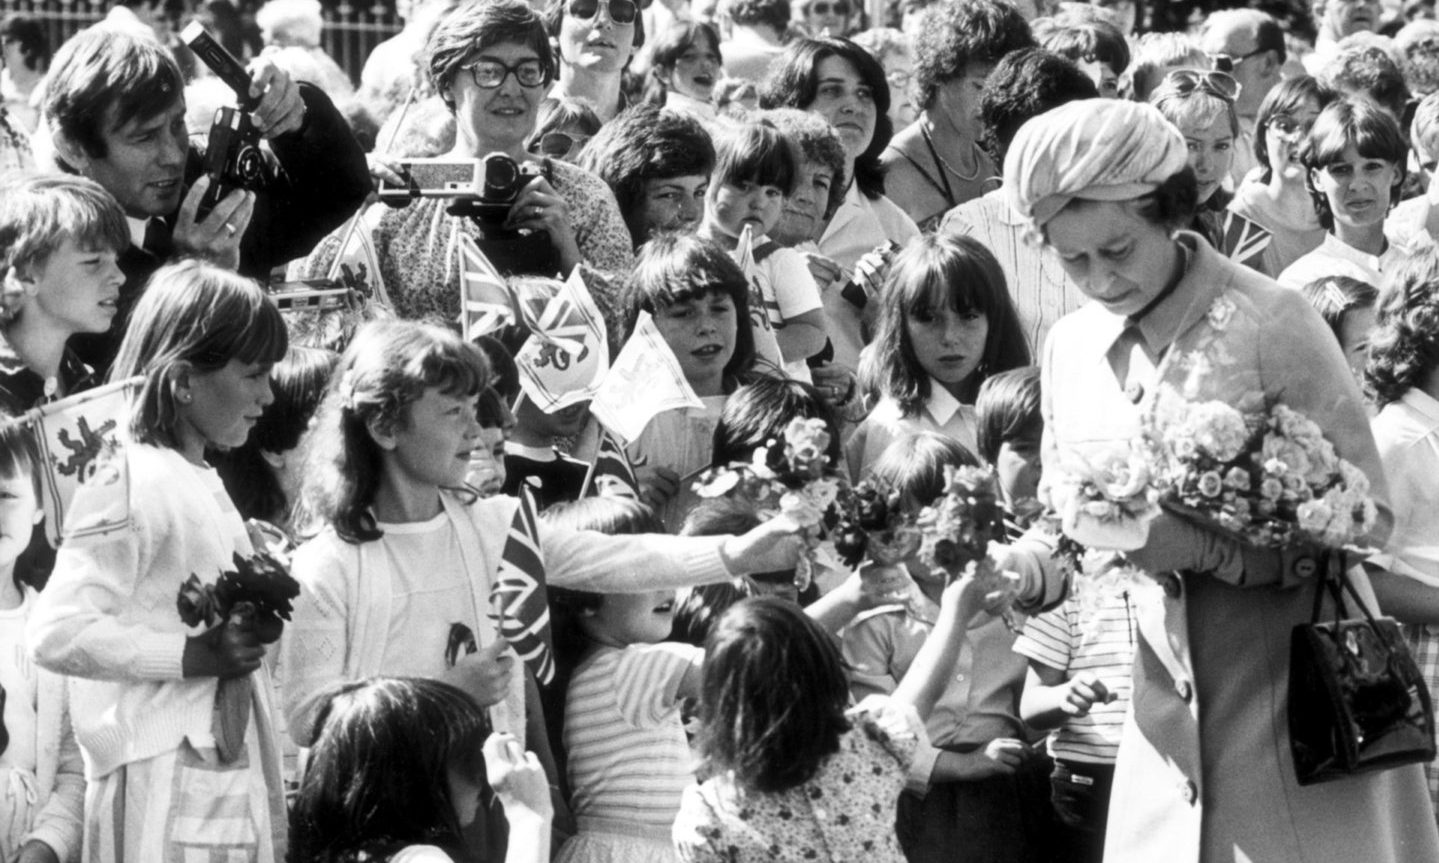 Youngsters with posies surround the Queen at the opening of Aberdeen's Queen Elizabeth Bridge in August, 1984. The Queen opened the £5.7 million bridge which is named after her. It replaced the Wellington Suspension Bridge over the Dee  between Torry and Ferryhill.